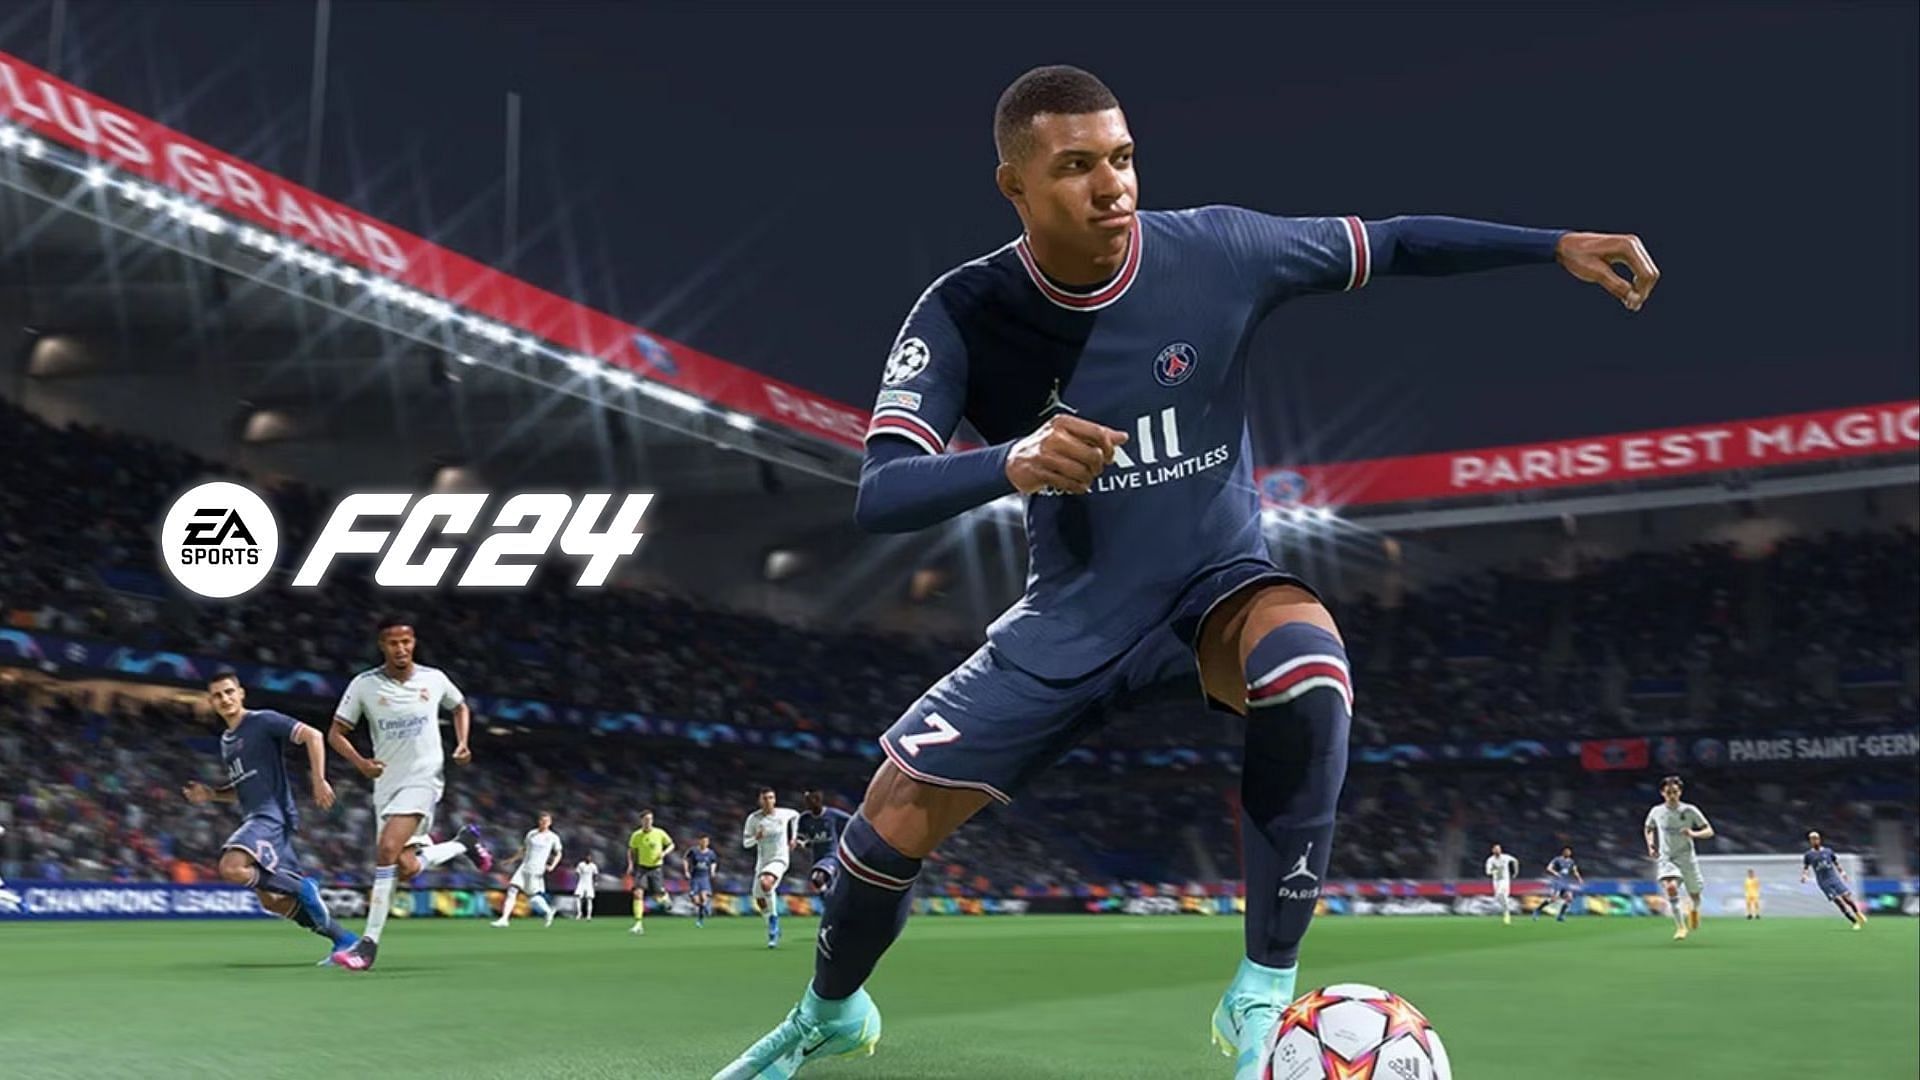 &quot;I feel sorry for whichever employee has to sift through this feedback&quot;: Reddit reacts to EA FC 24 Player feedback portal